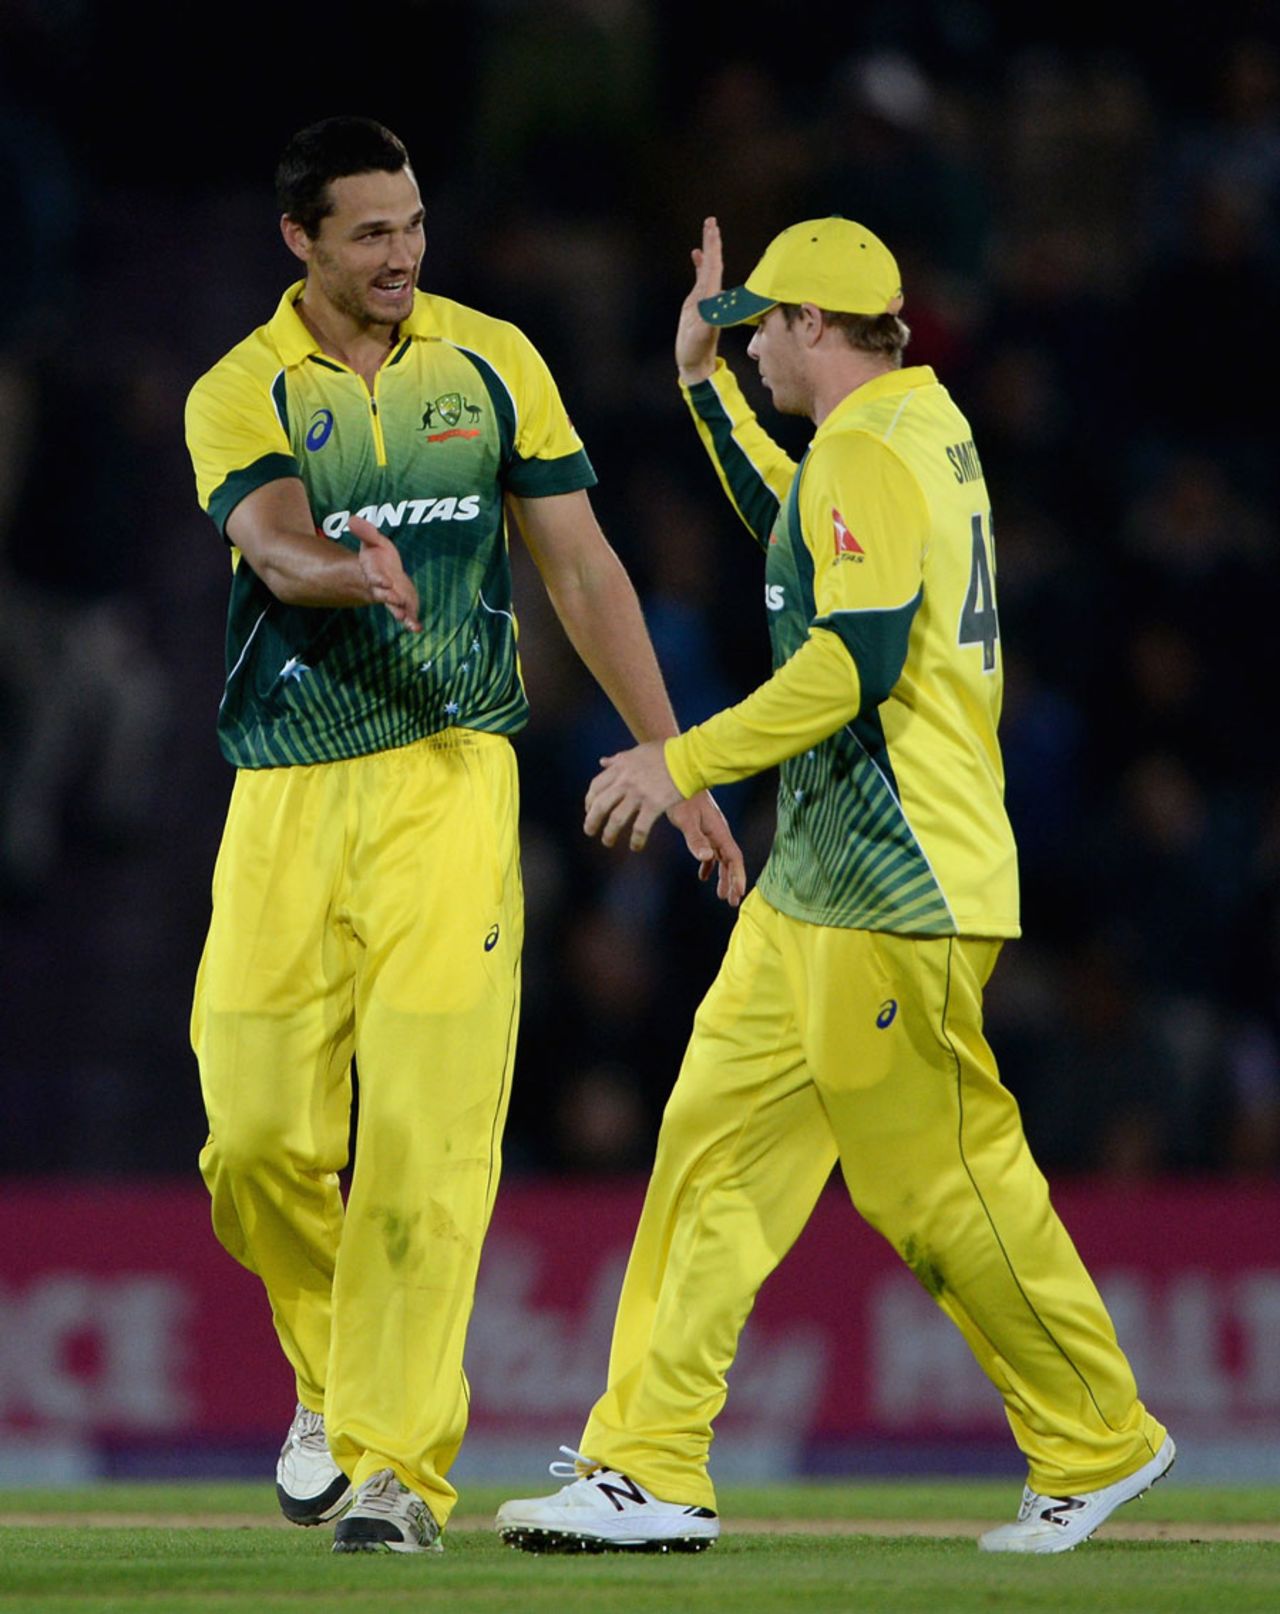 Nathan Coulter-Nile gets a high five from his captain, England v Australia, 1st ODI, Ageas Bowl, September 3, 2015